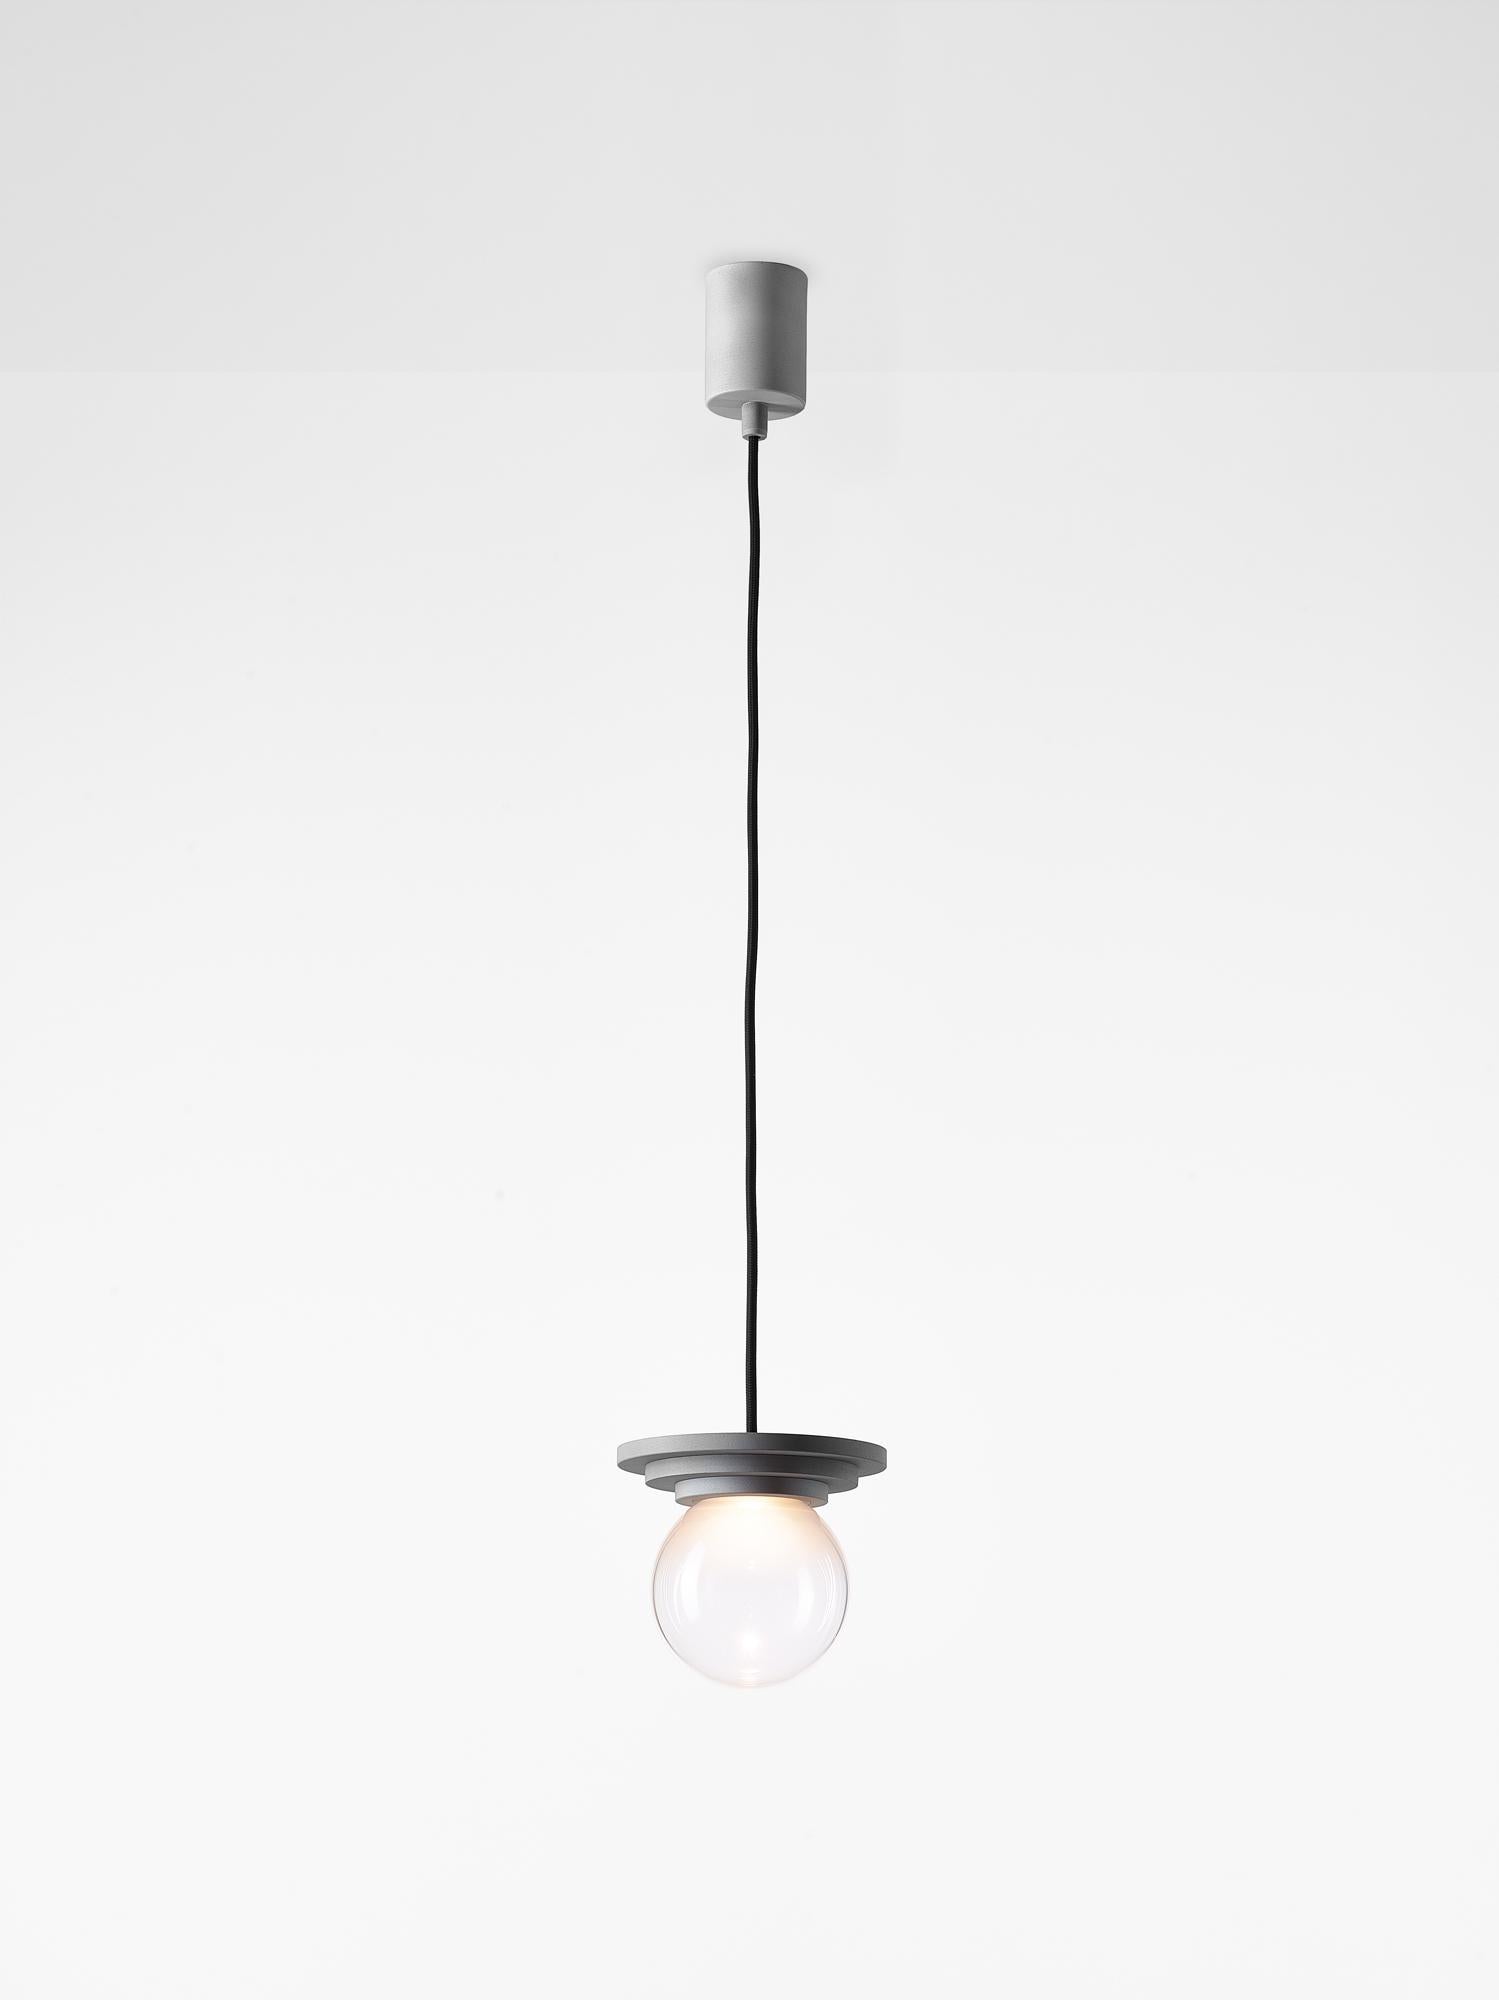 Set of 2 silver stratos mini ball pendant light by Dechem Studio.
Dimensions: D 12 x H 14 cm.
Materials: aluminum, glass.
Also available: different colours available.

Different shapes of capsules and spheres contrast with anodized alloy